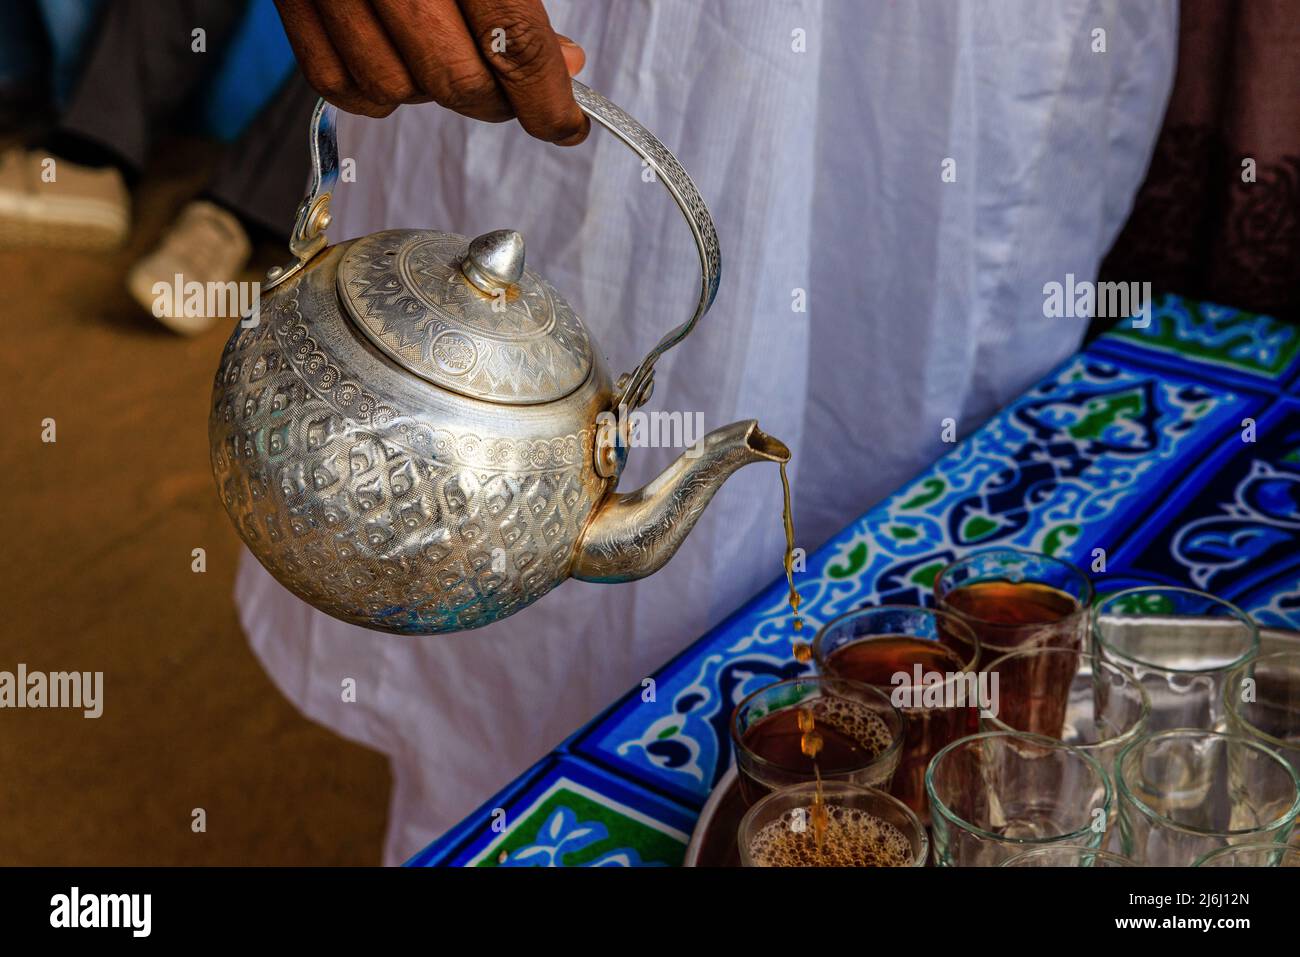 visiting a nubian village in aswan, egypt our host pours tea from a silver teapot Stock Photo